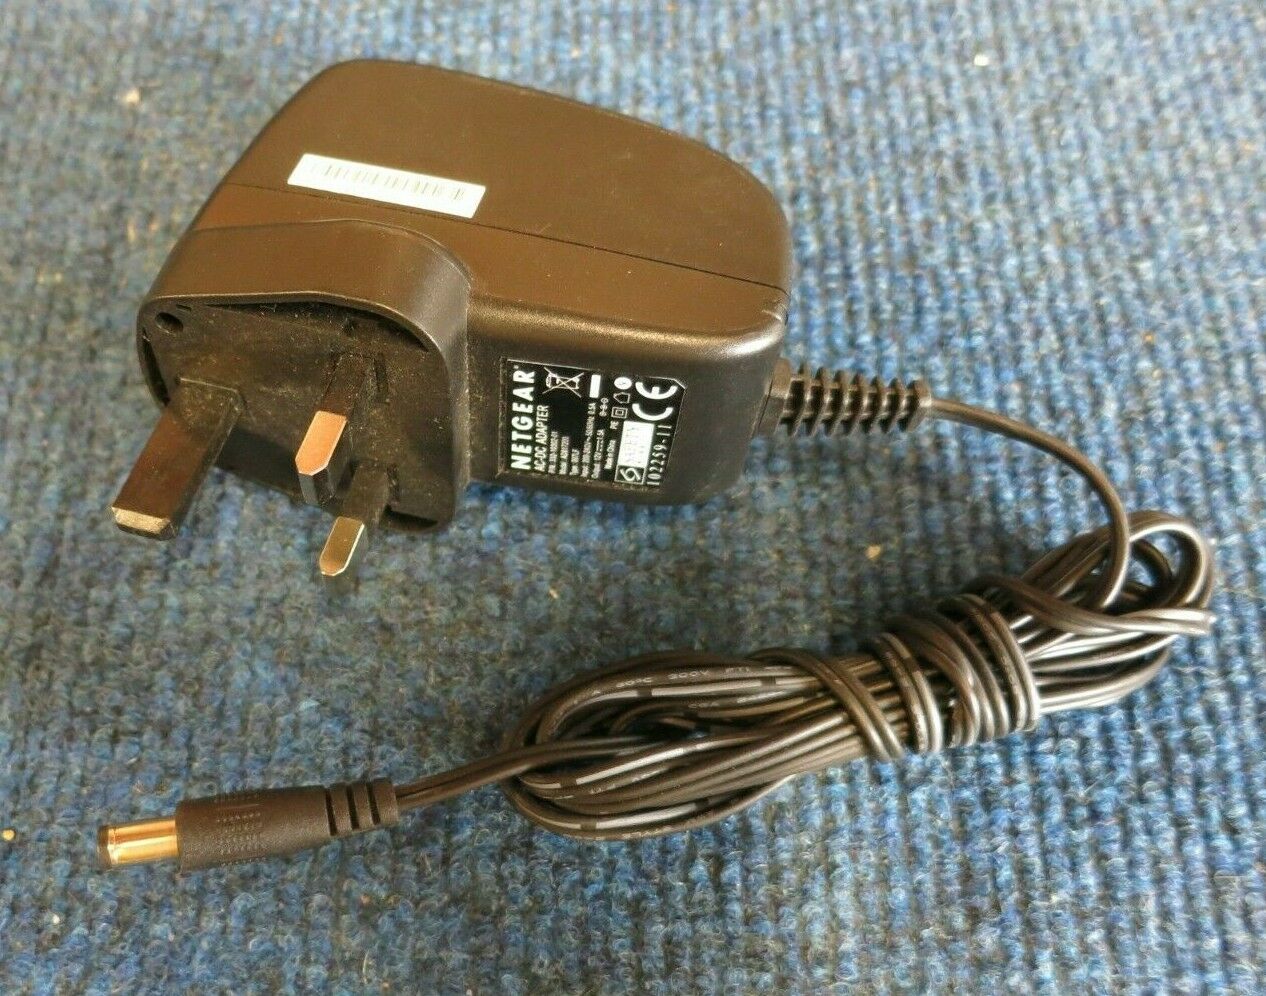 New Netgear 332-10302-01 AD817200 18W 12V 1.5A AC Power Adapter Charger UK Plug